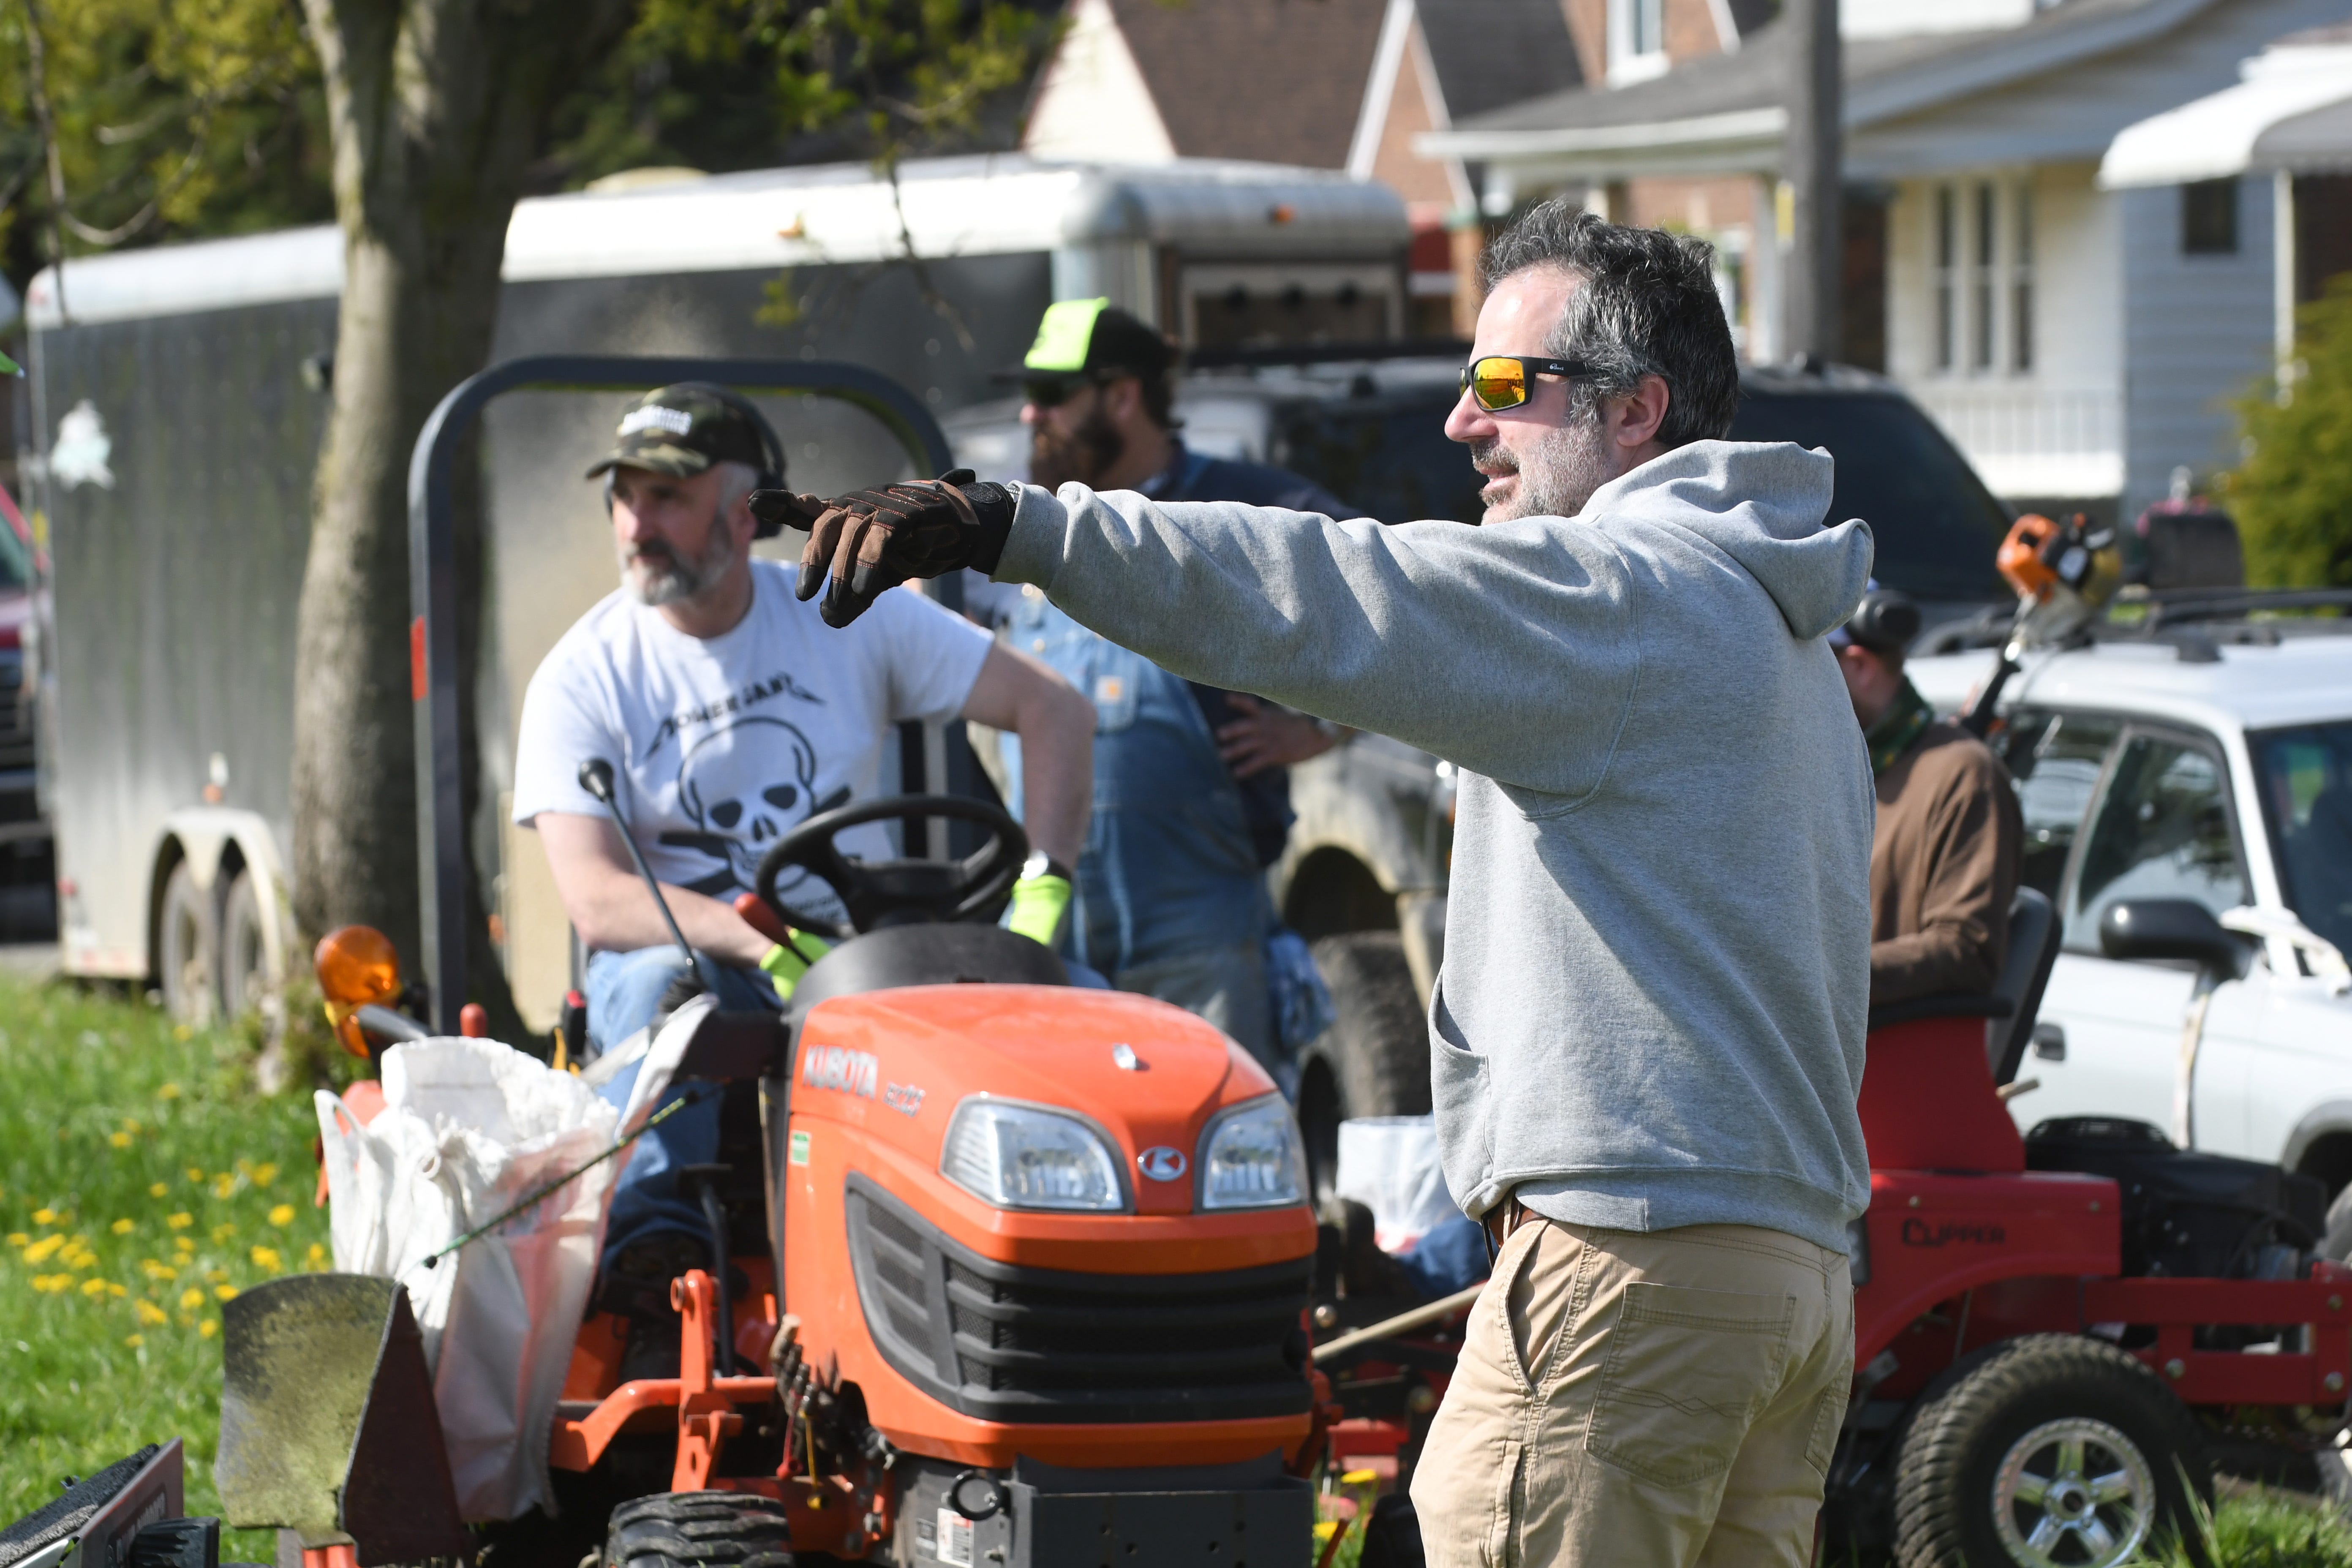 Tom Nardone, founder, Detroit Mower Gang, gives instructions as members begin their 2020 Motown Mowdown, a 12- hour mowing marathon, which started at Hammerberg Playfield in Detroit on Saturday, May 16, 2020.